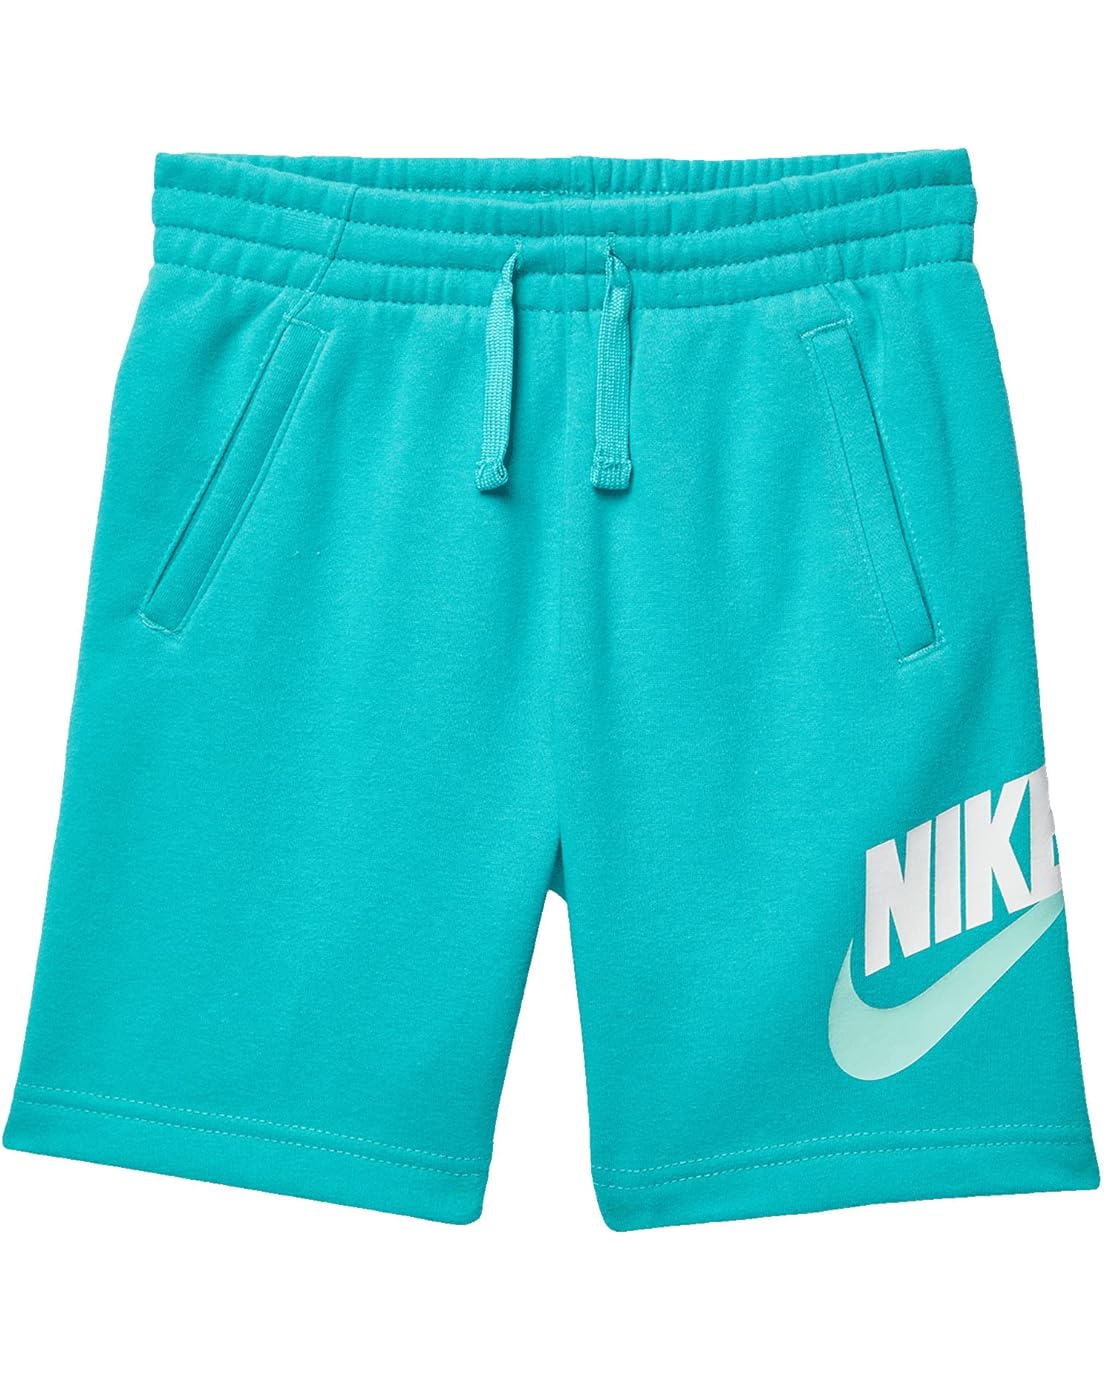 Nike Kids French Terry Shorts (Little Kids)